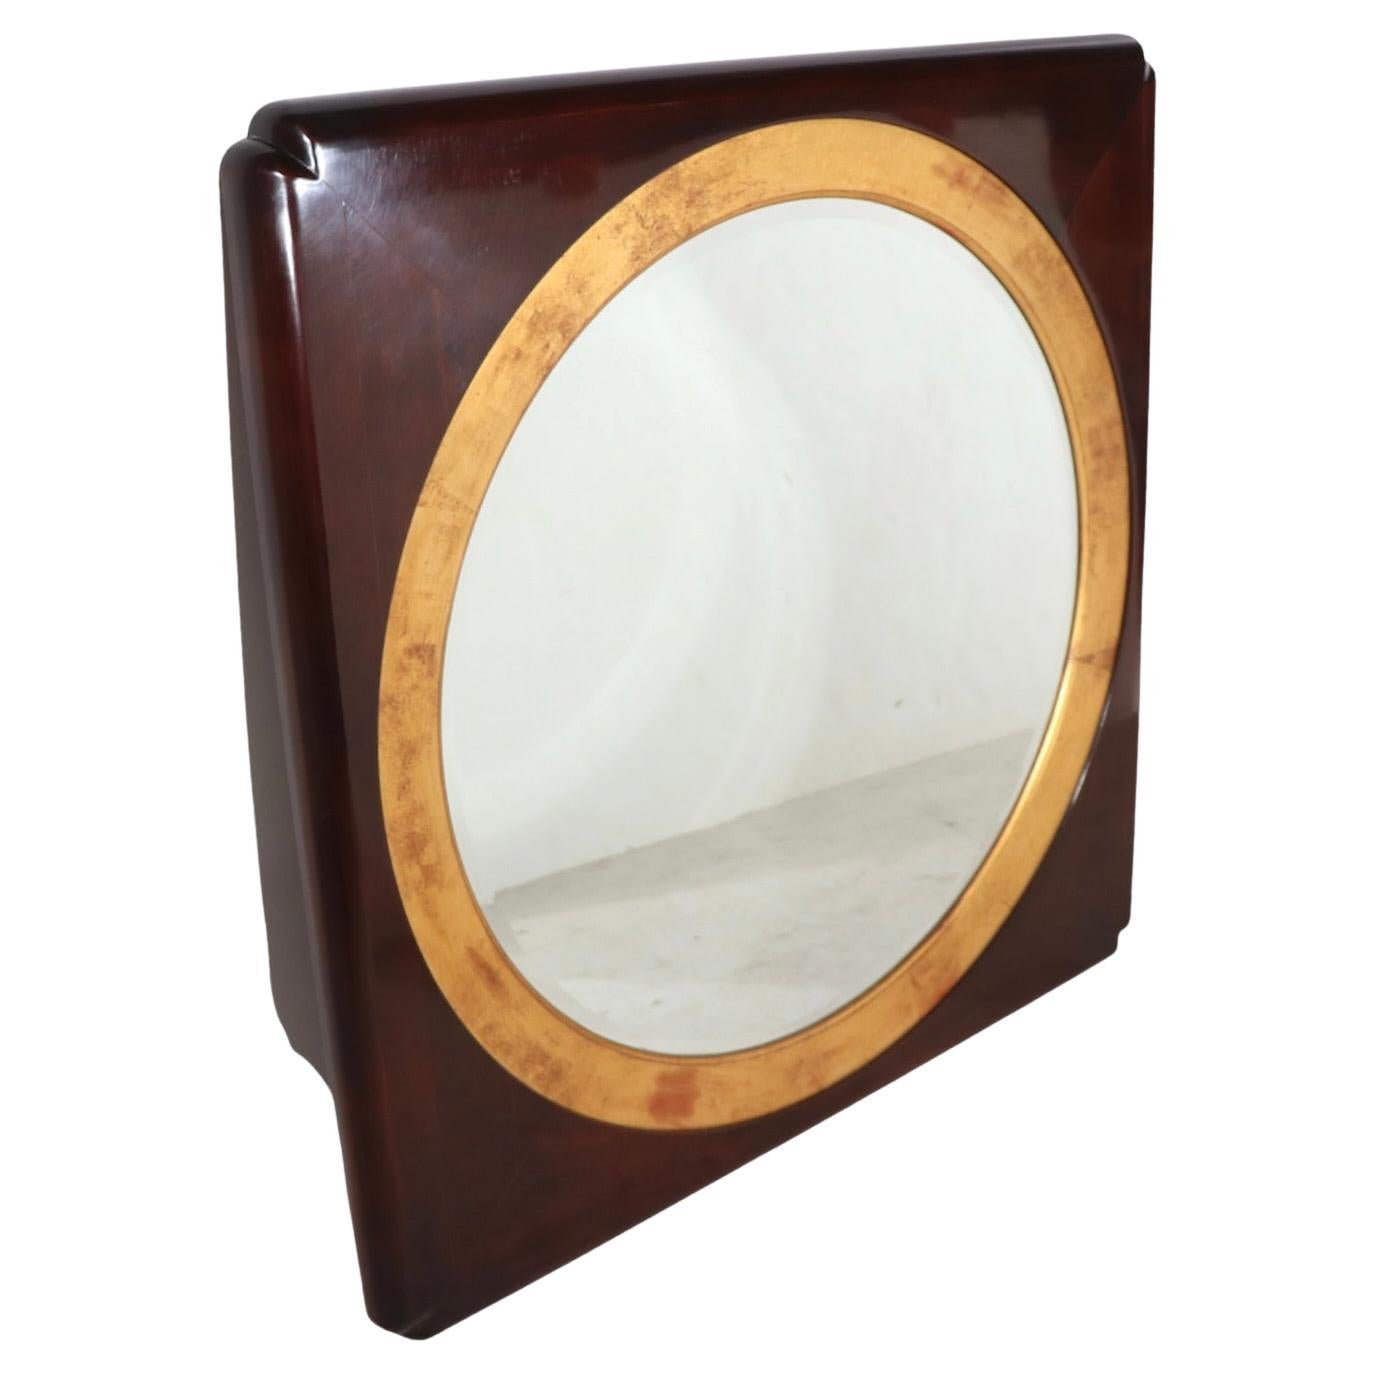 Spectacular porthole mirror by top quality furniture maker, Henredon ca. 1970/1980's. The mirror features a circular center, (32 in.diameter) surrounded by gilt trim, within a solid dark wood frame. The frame shows a Chinese design influence,